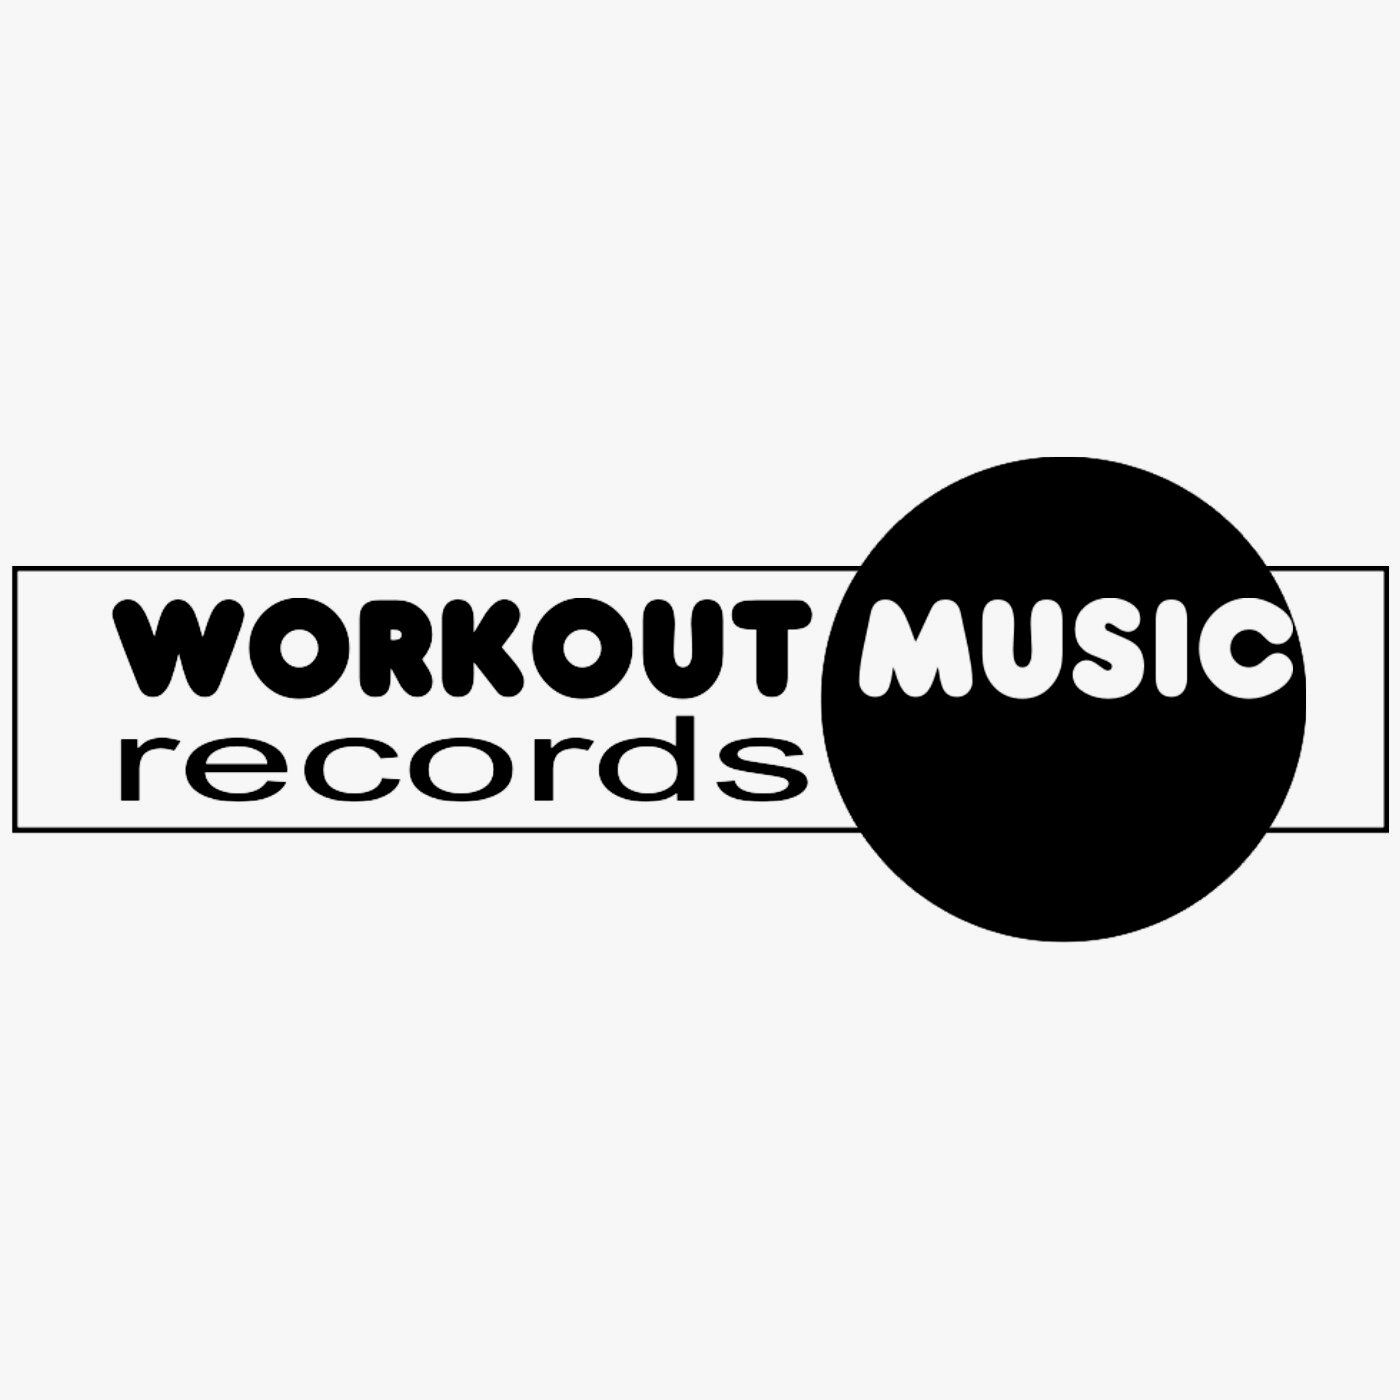 Music for fitness professionals, personal workout and all sports that require to intensity with musical beat.